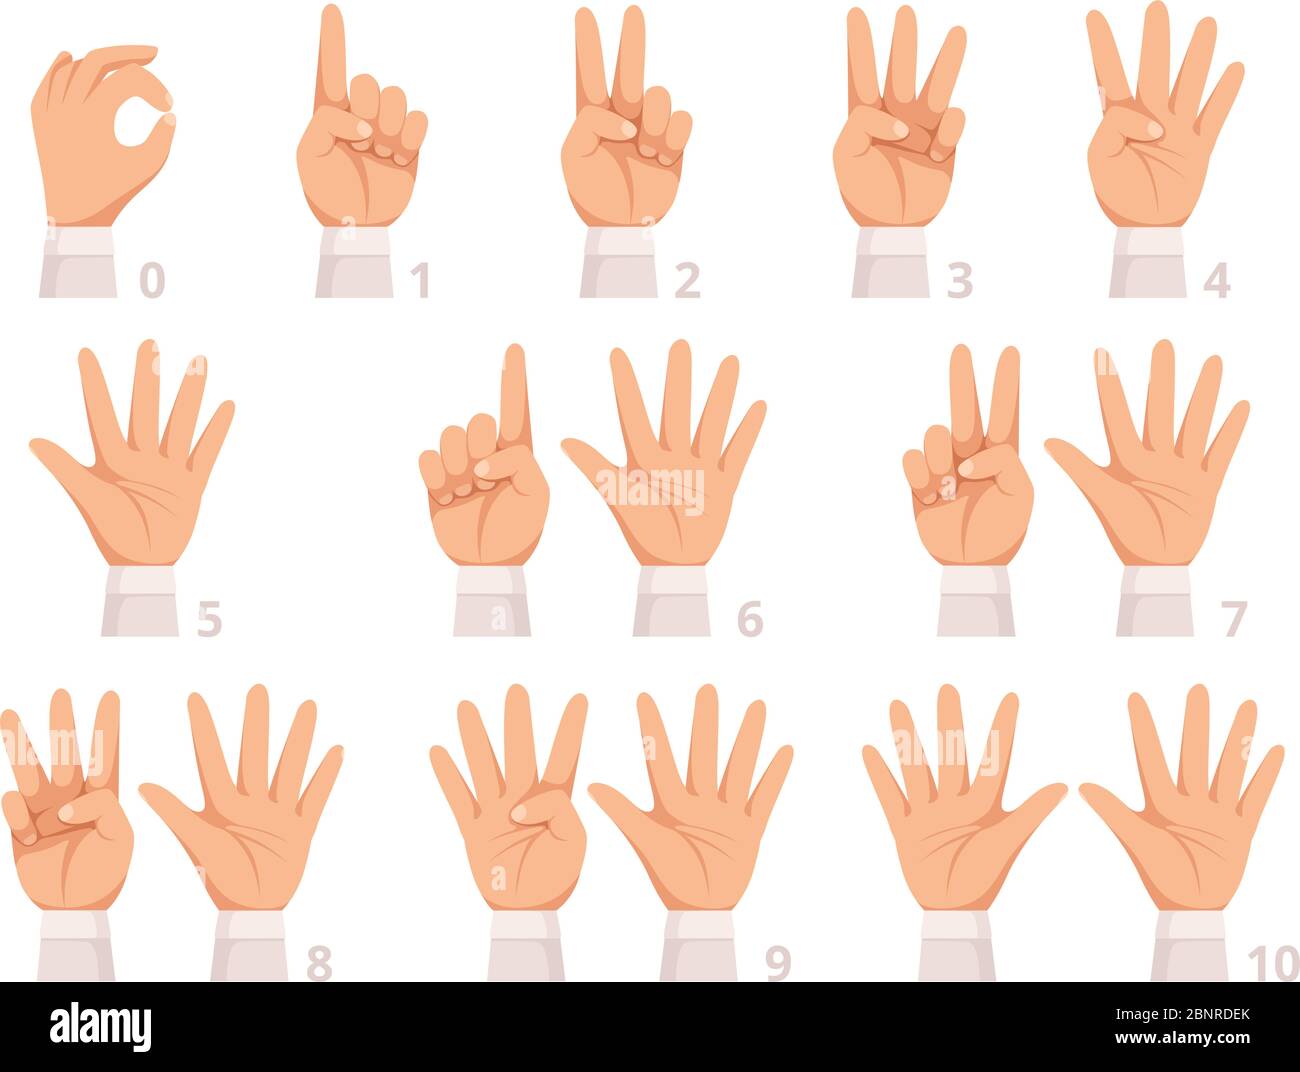 Hands gesture numbers. Human palm and fingers show different numbers vector cartoon illustration Stock Vector